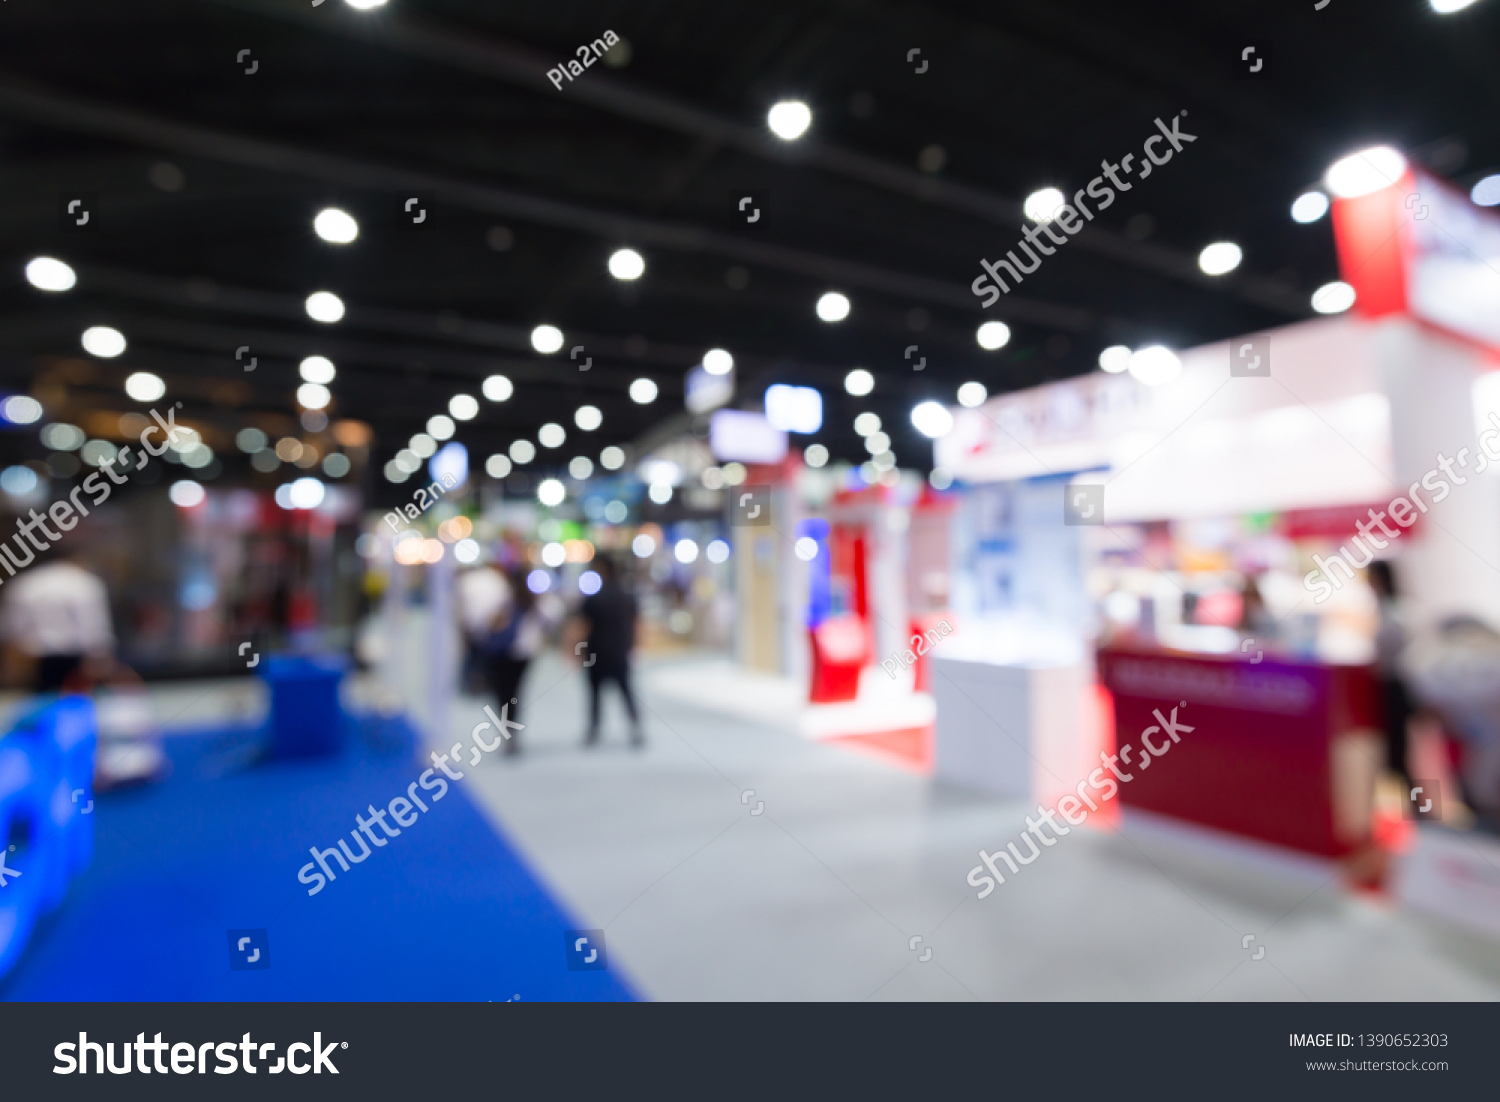 Abstract blur people in exhibition hall event trade show expo background. Large international exhibition, convention center, MICE industry business concept #1390652303